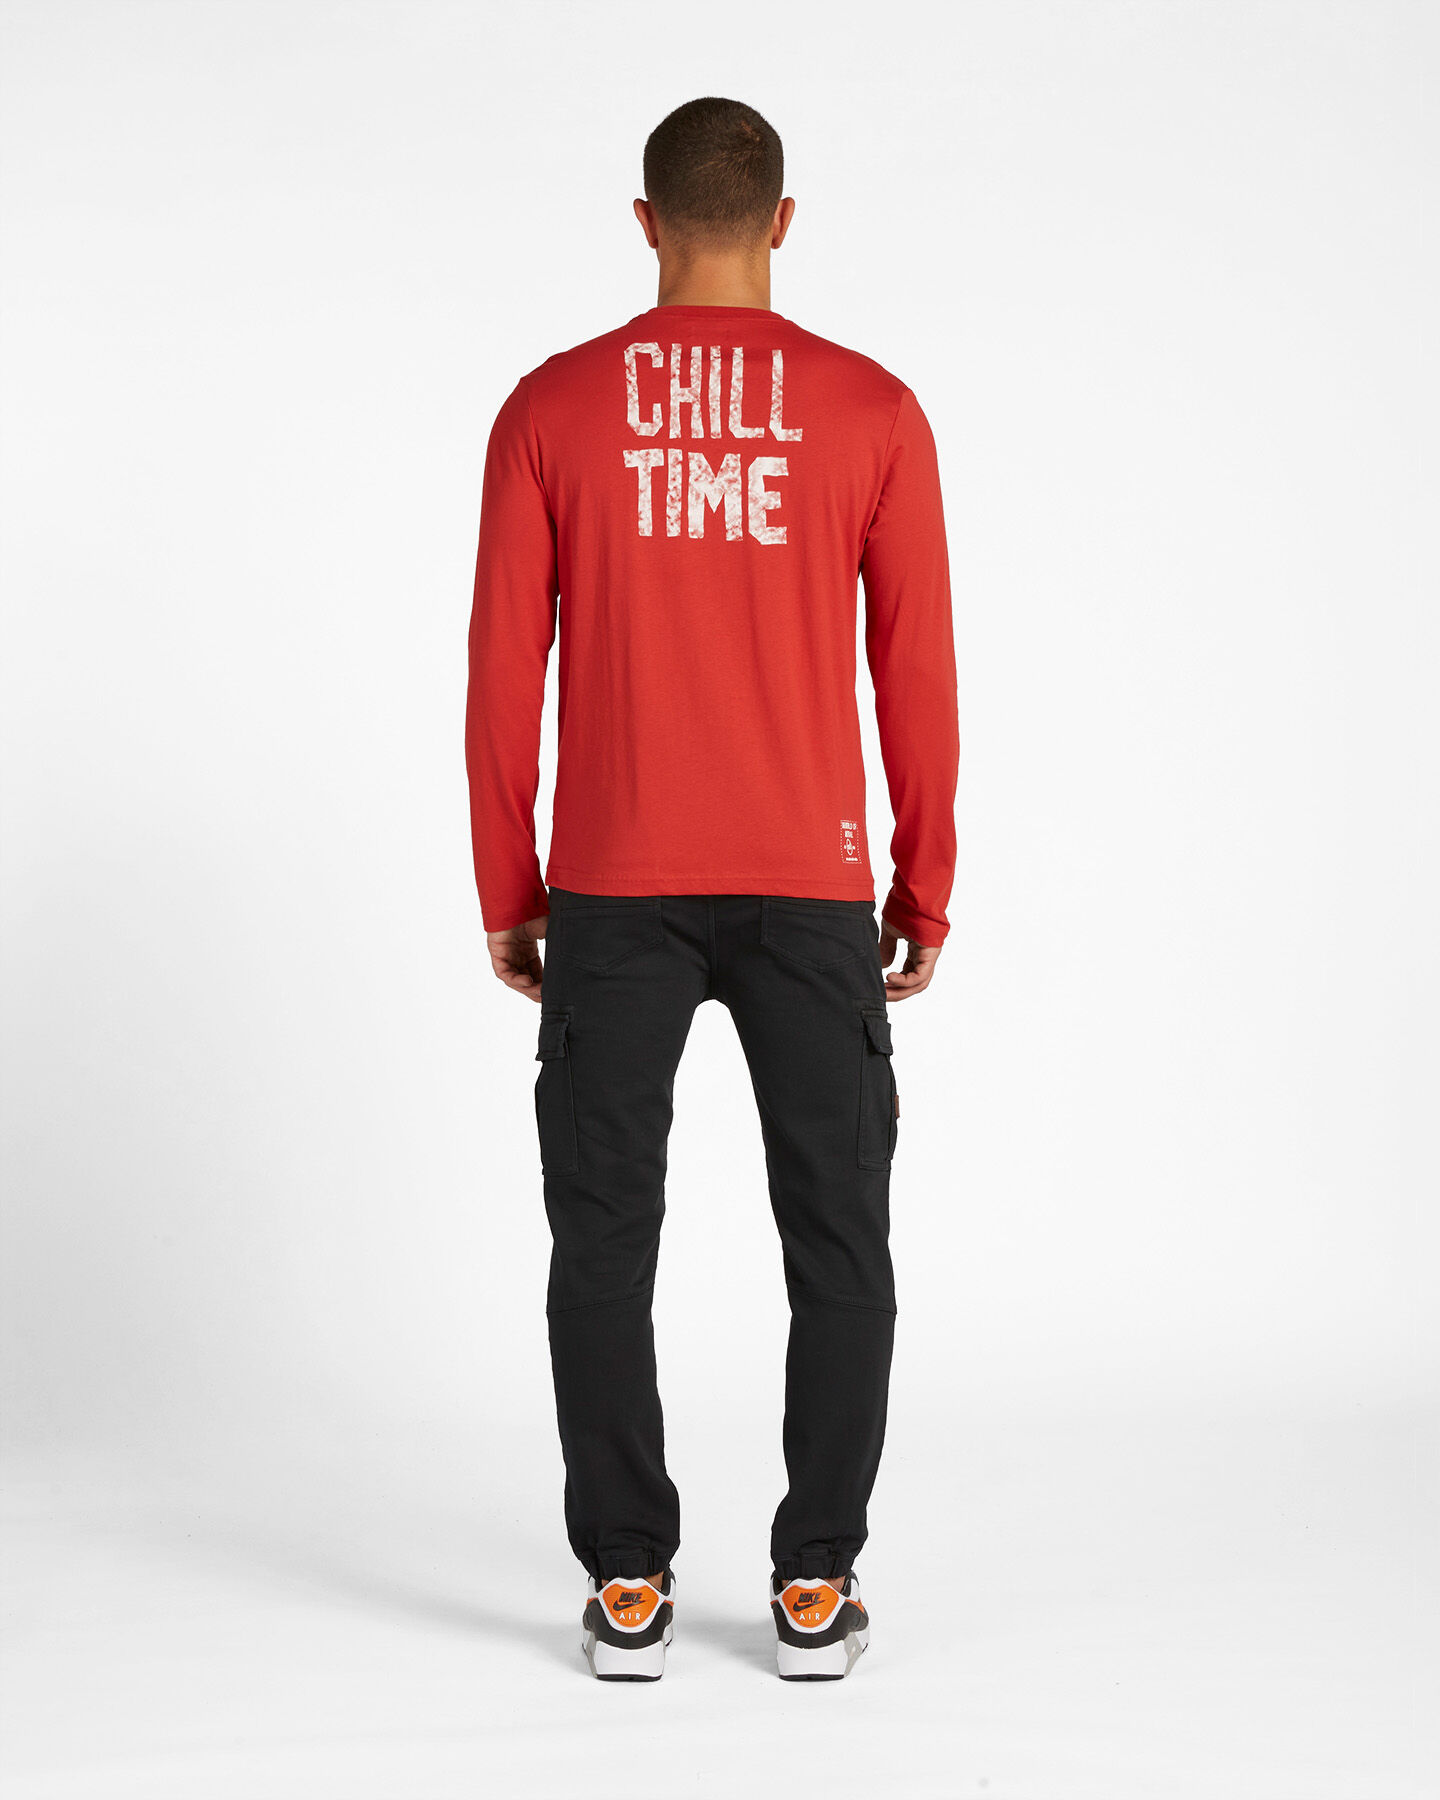  T-Shirt MISTRAL CHILL TIME M S4107861|277|XXL scatto 2